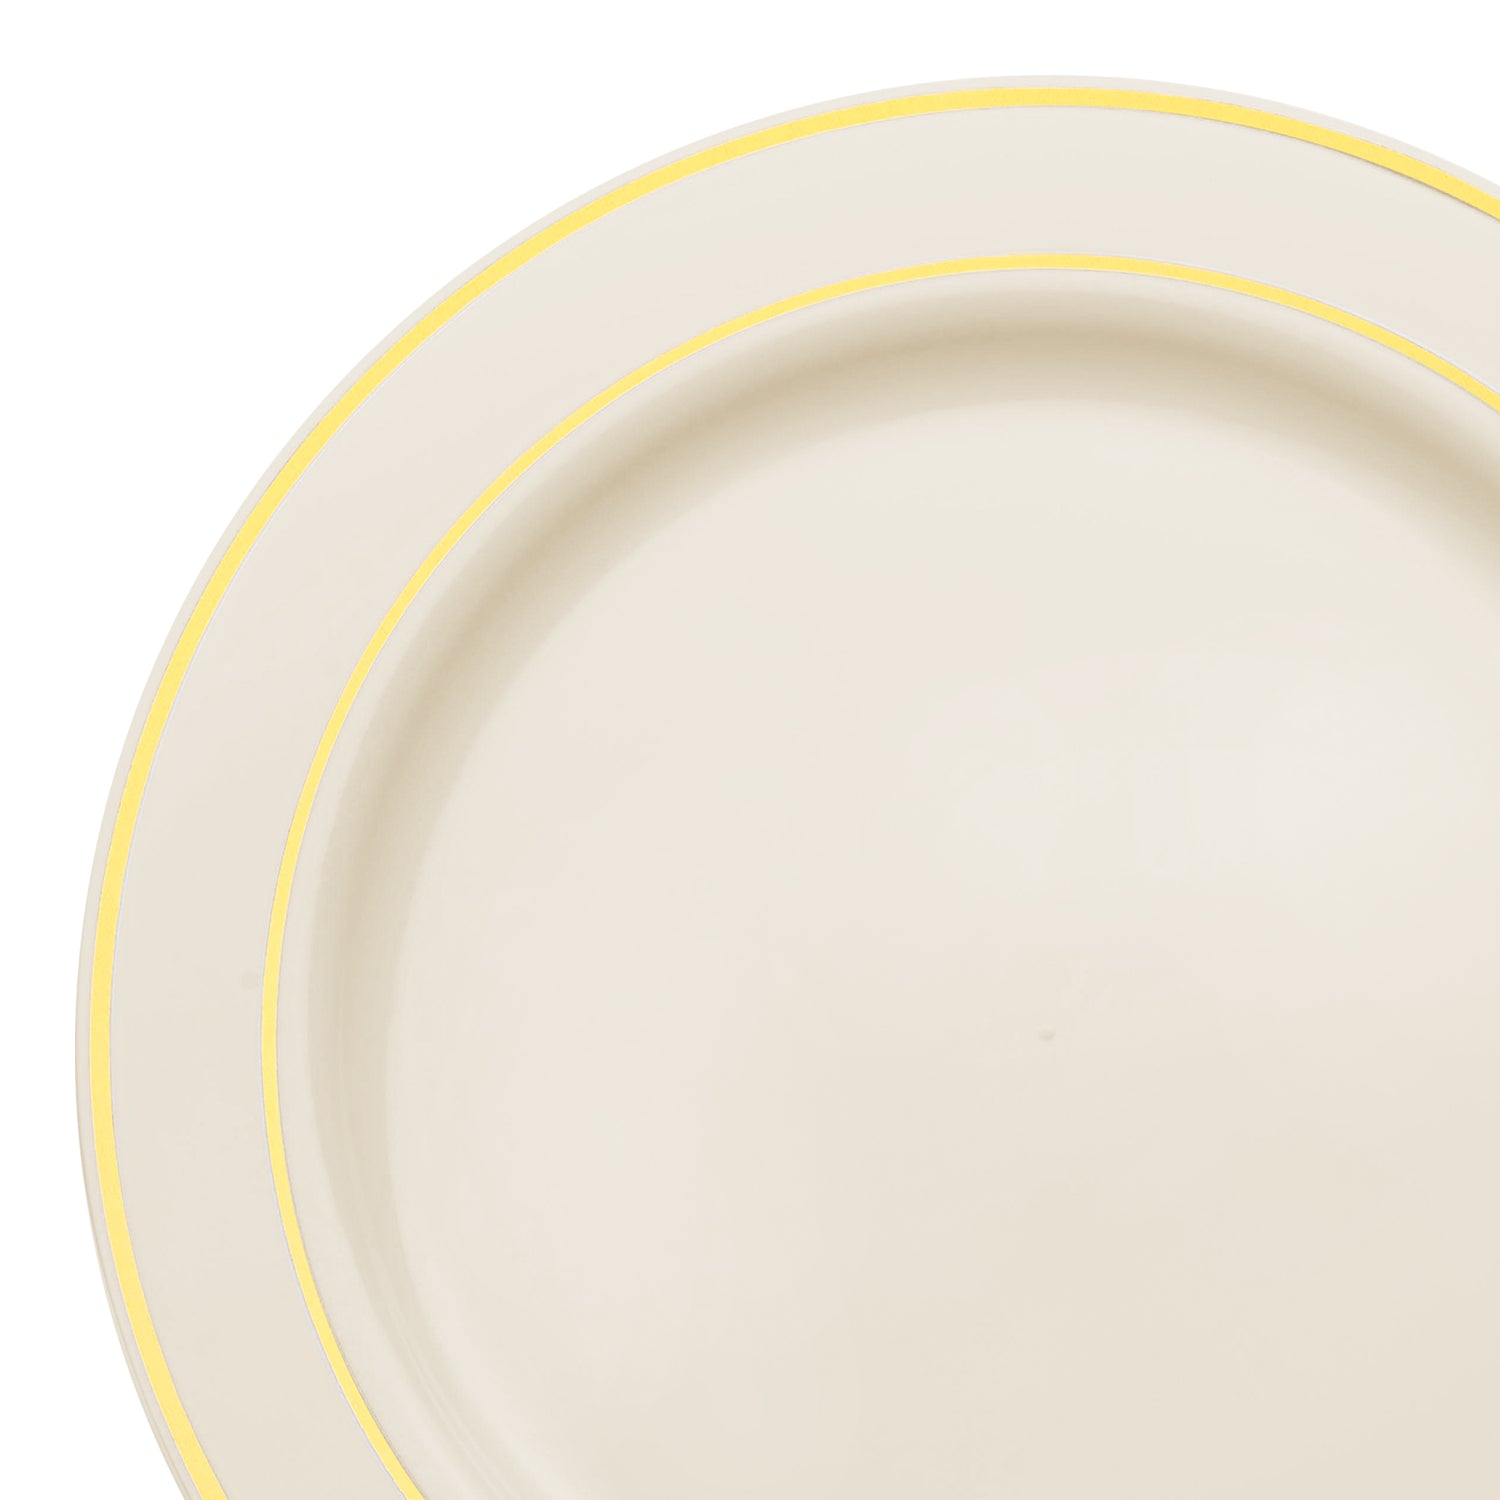 Ivory with Gold Edge Rim Plastic Appetizer/Salad Plates (7.5") | The Kaya Collection